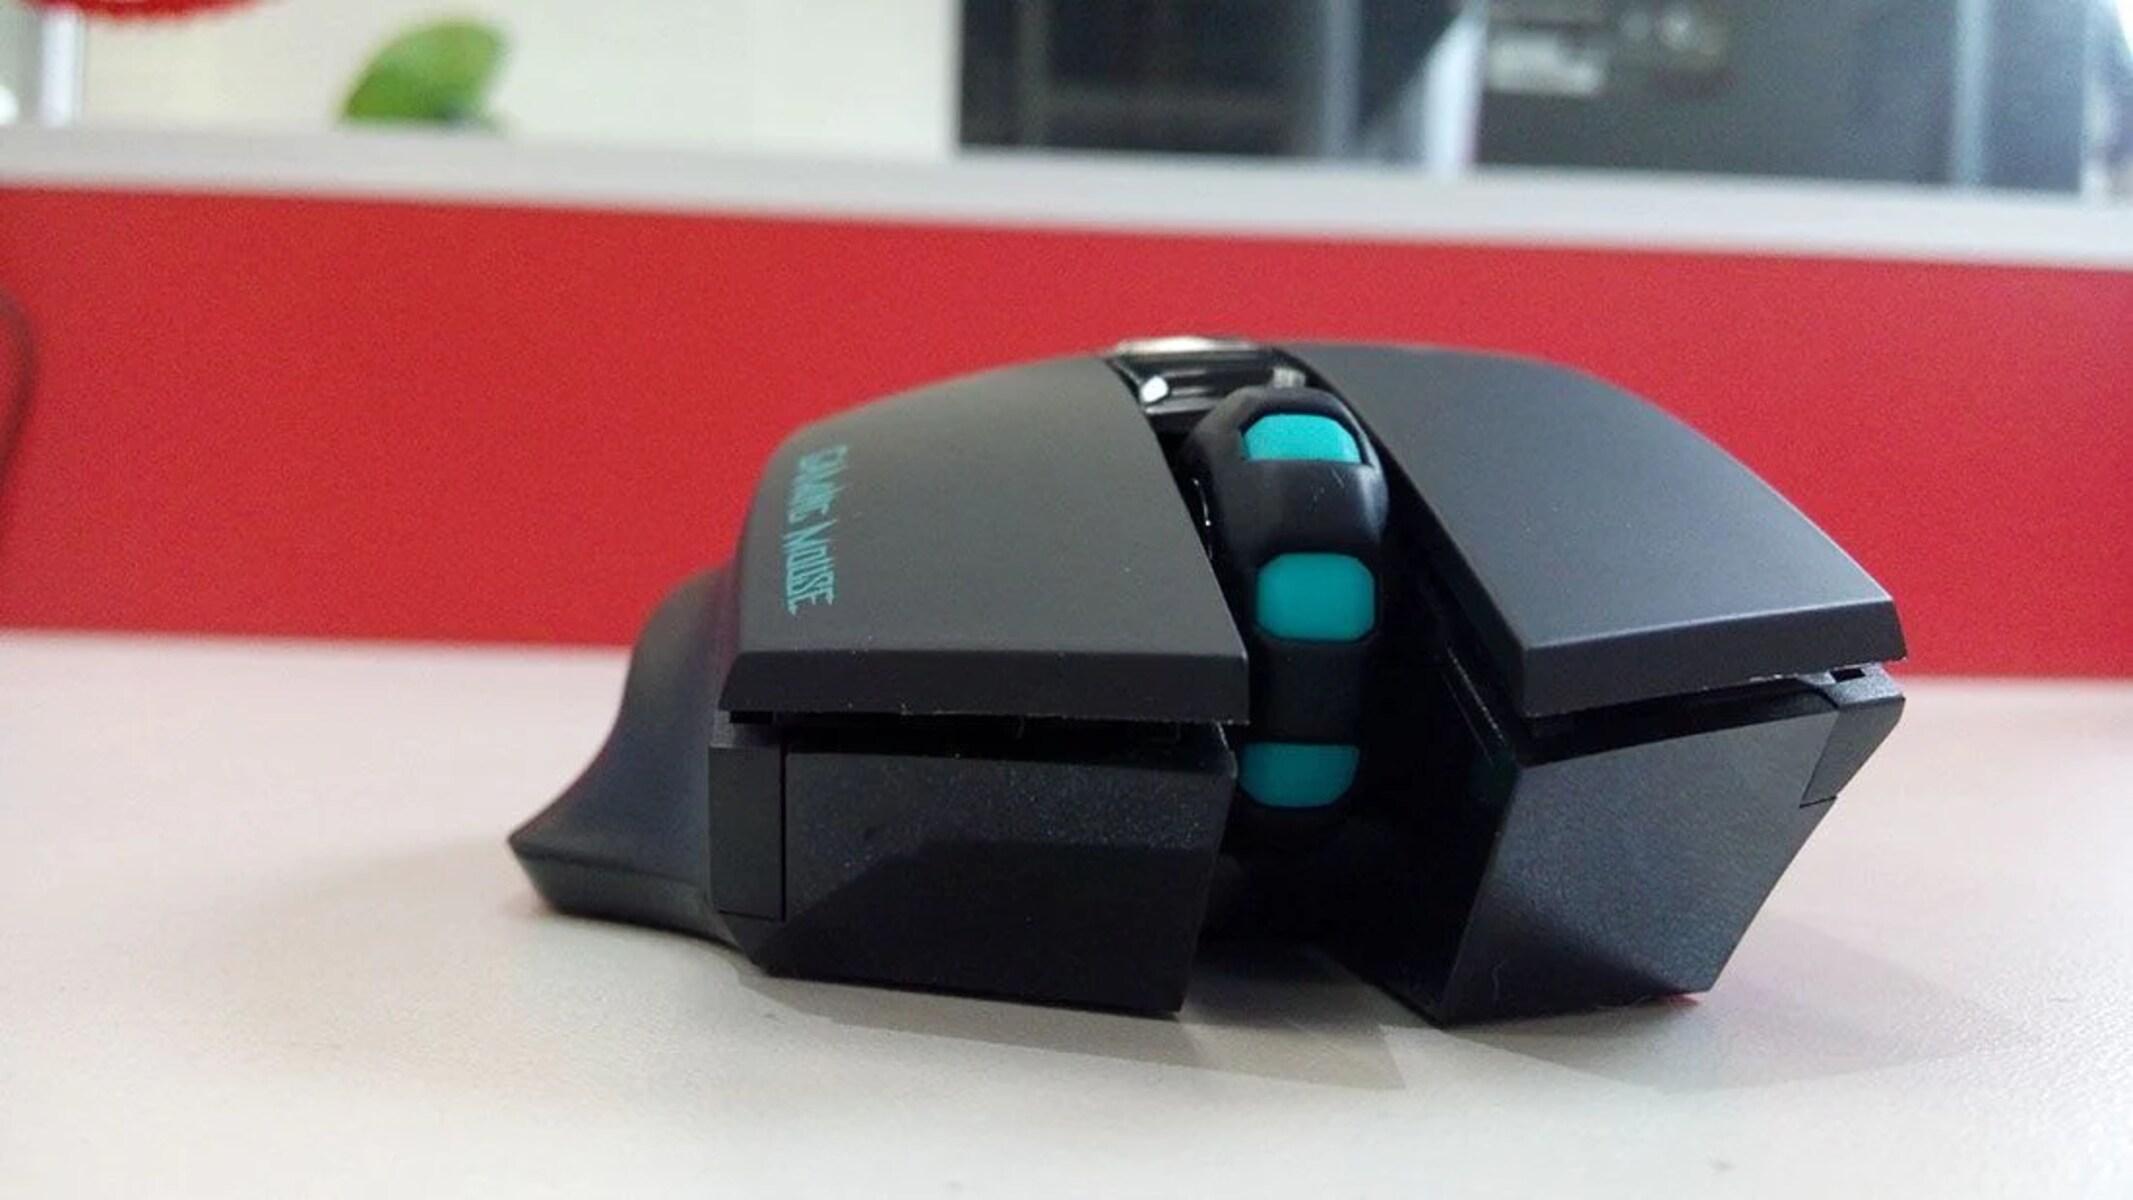 How To Turn The Light On A Havit Gaming Mouse